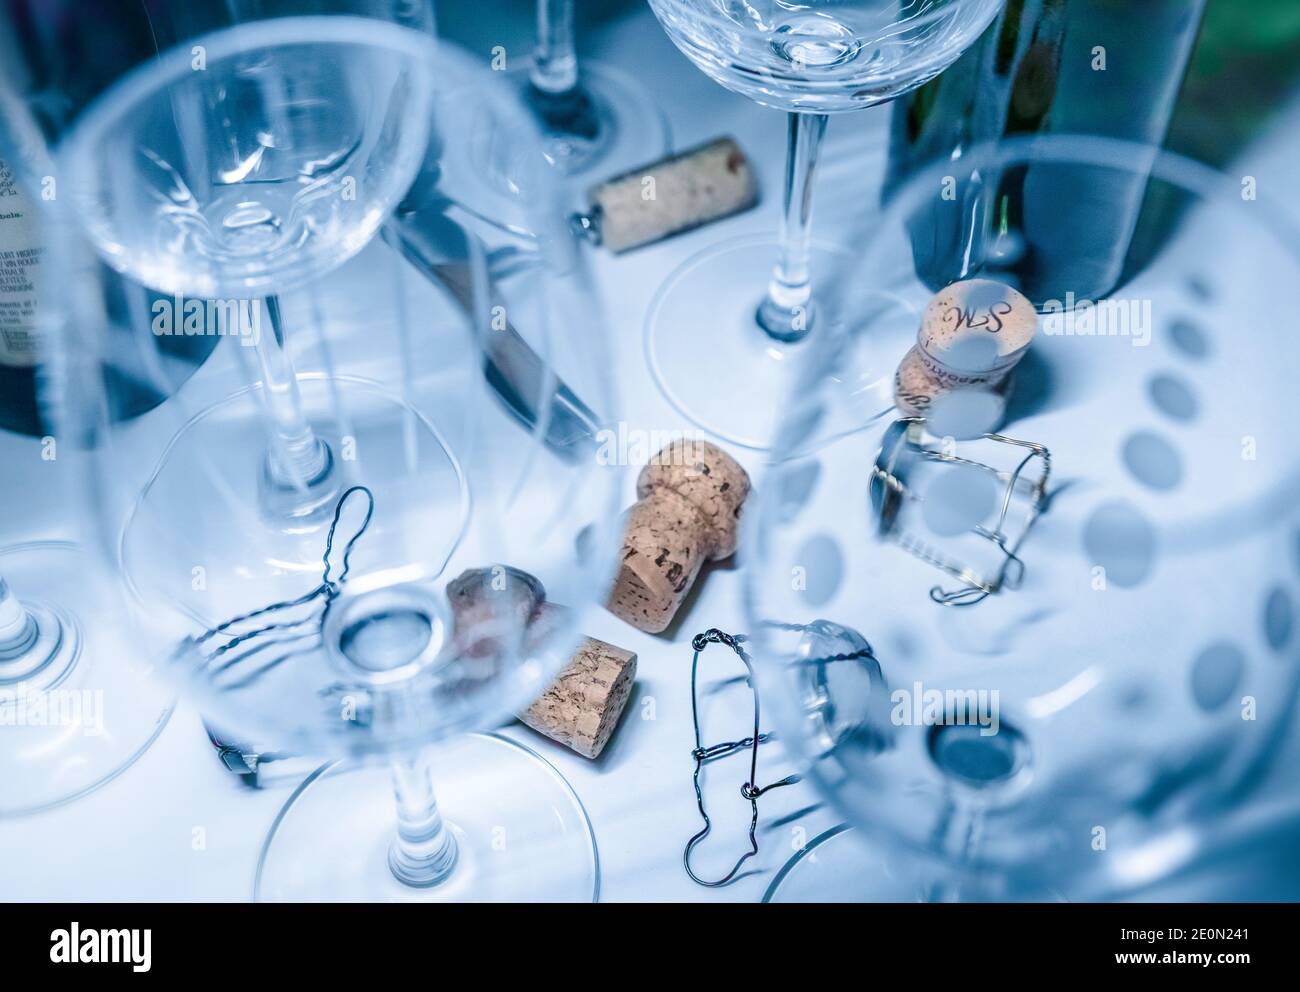 Wine glasses, corks, all in a mess.. Stock Photo